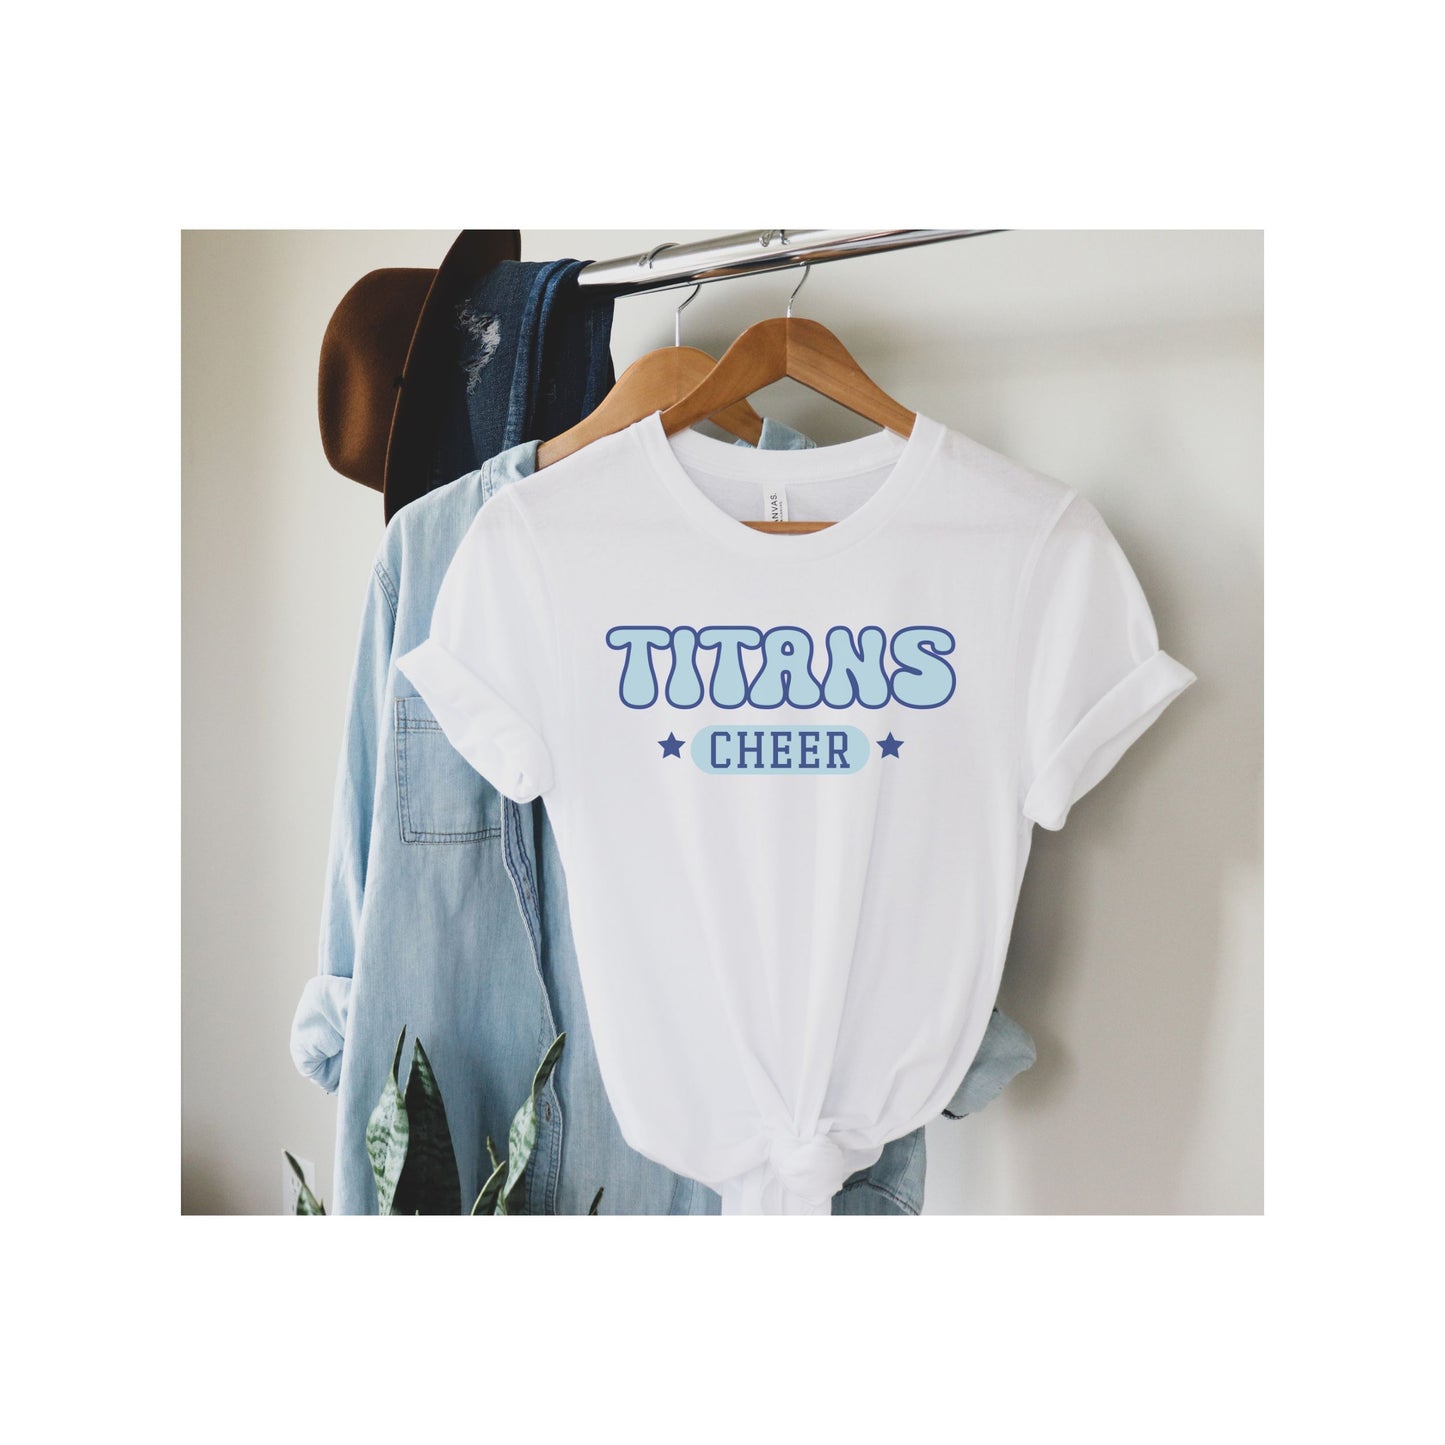 Front and Back Designs | Retro Wavy Text Tee Shirt | Custom Order